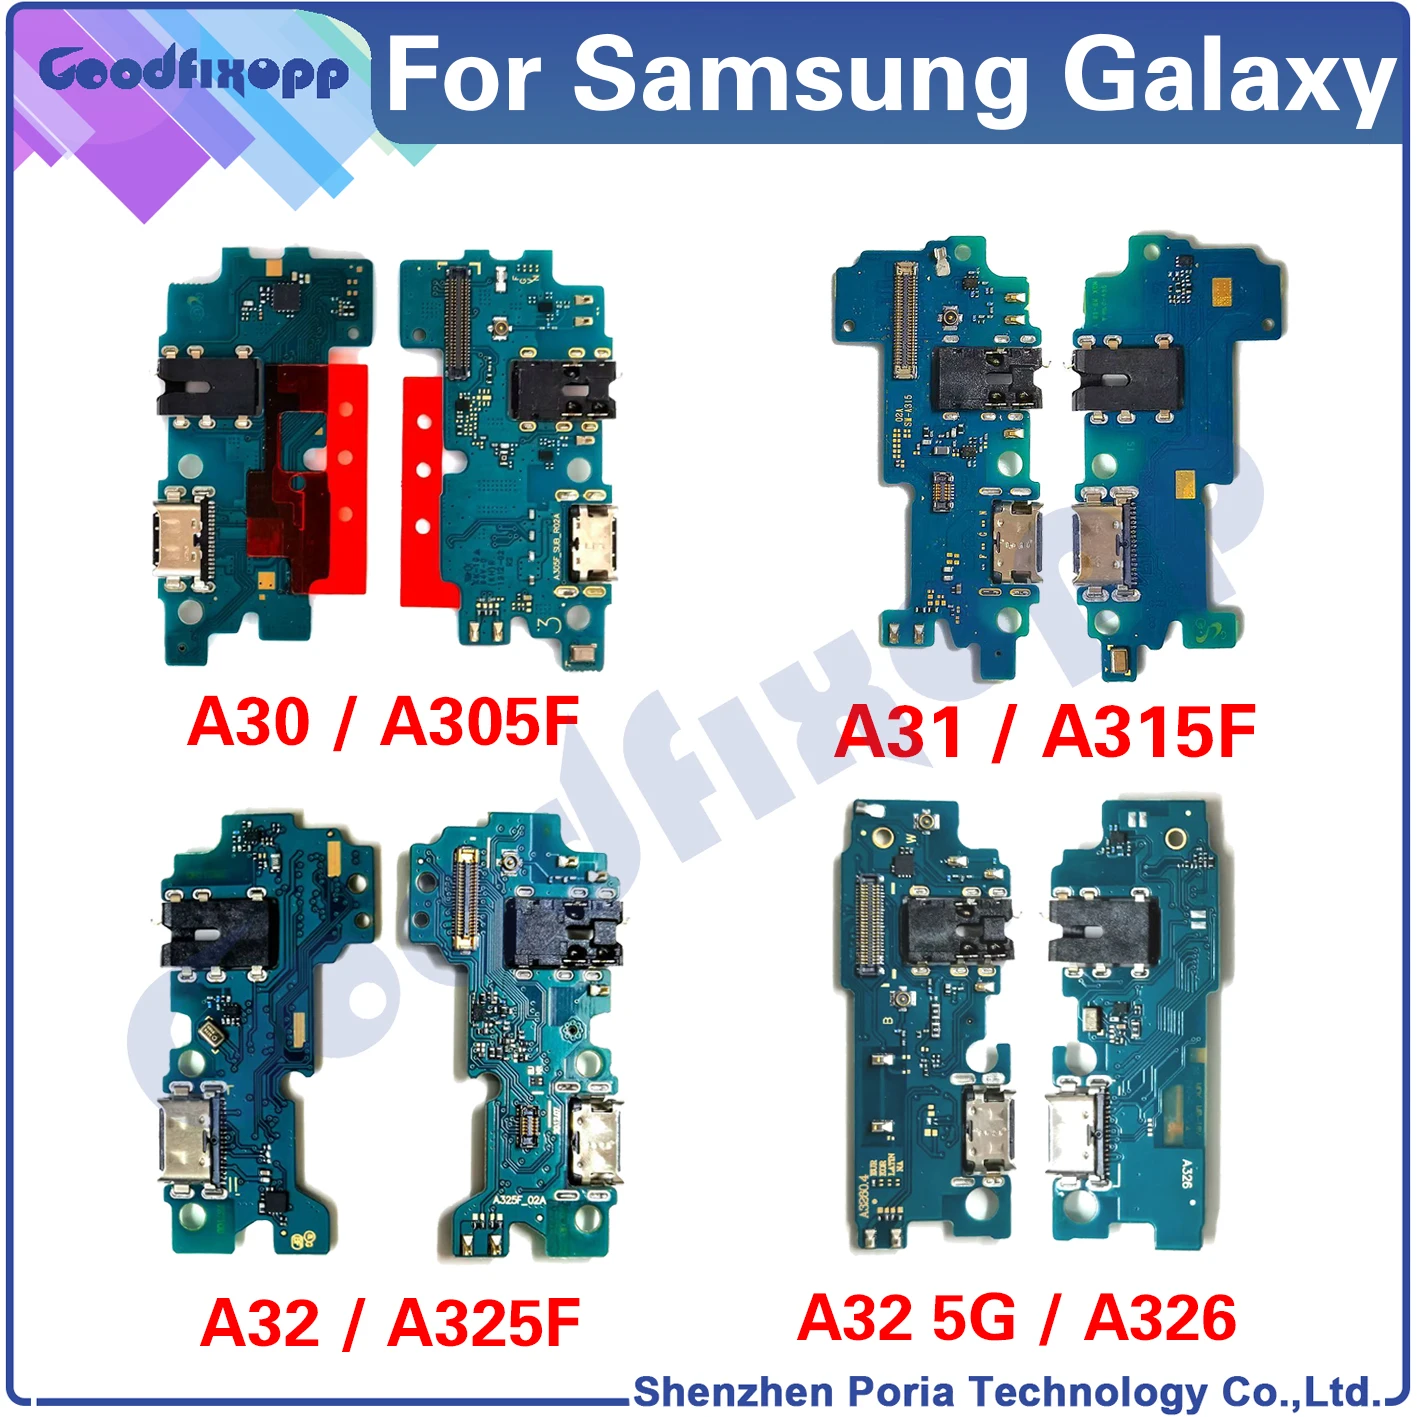 

Charging Port For Samsung Galaxy A30 SM-A305F A31 SM-A315F A32 SM-A325F A32 5G SM-A326 Charger Dock Connector Cable Flex